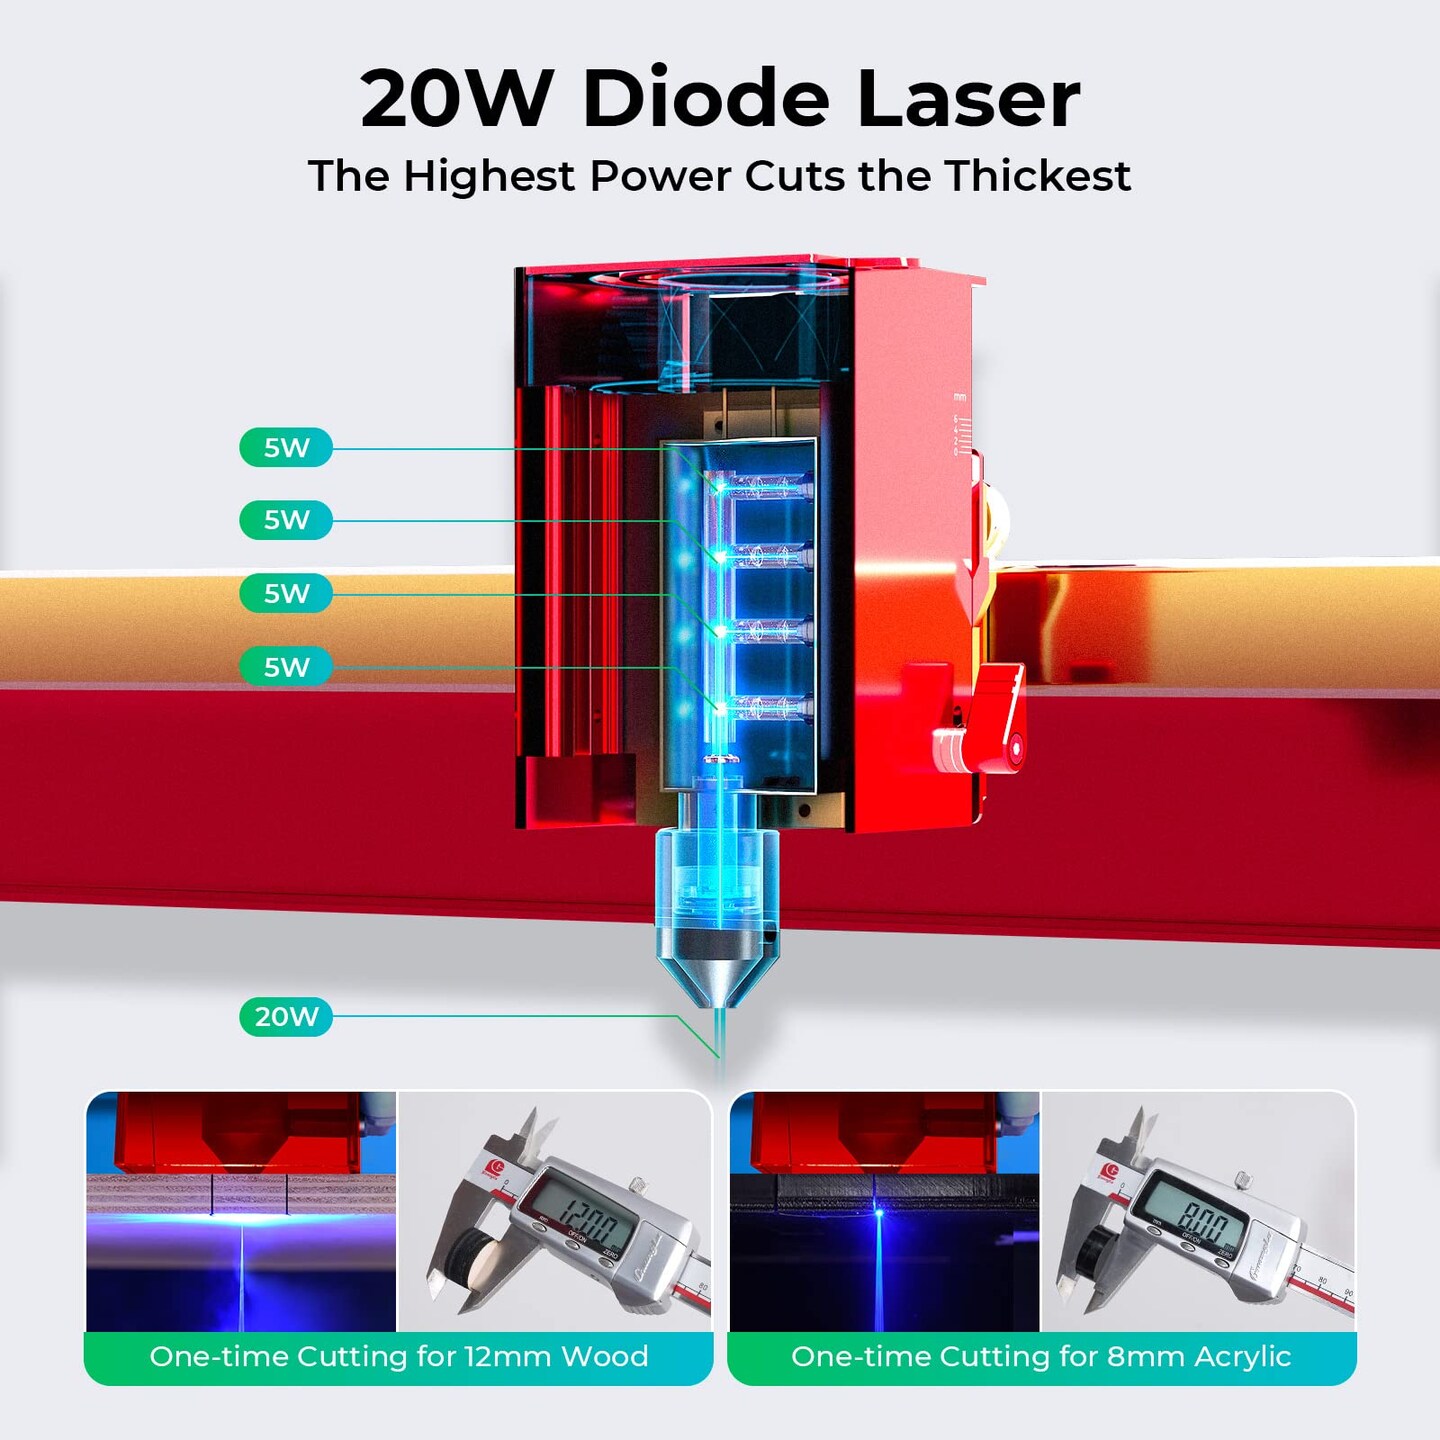 xTool D1 Pro Laser Engraver, 5W Output Power Laser Engraver and Cutter  Machine for Beginners, Higher Accuracy Laser Cutter for Wood, Leather,  Acrylic